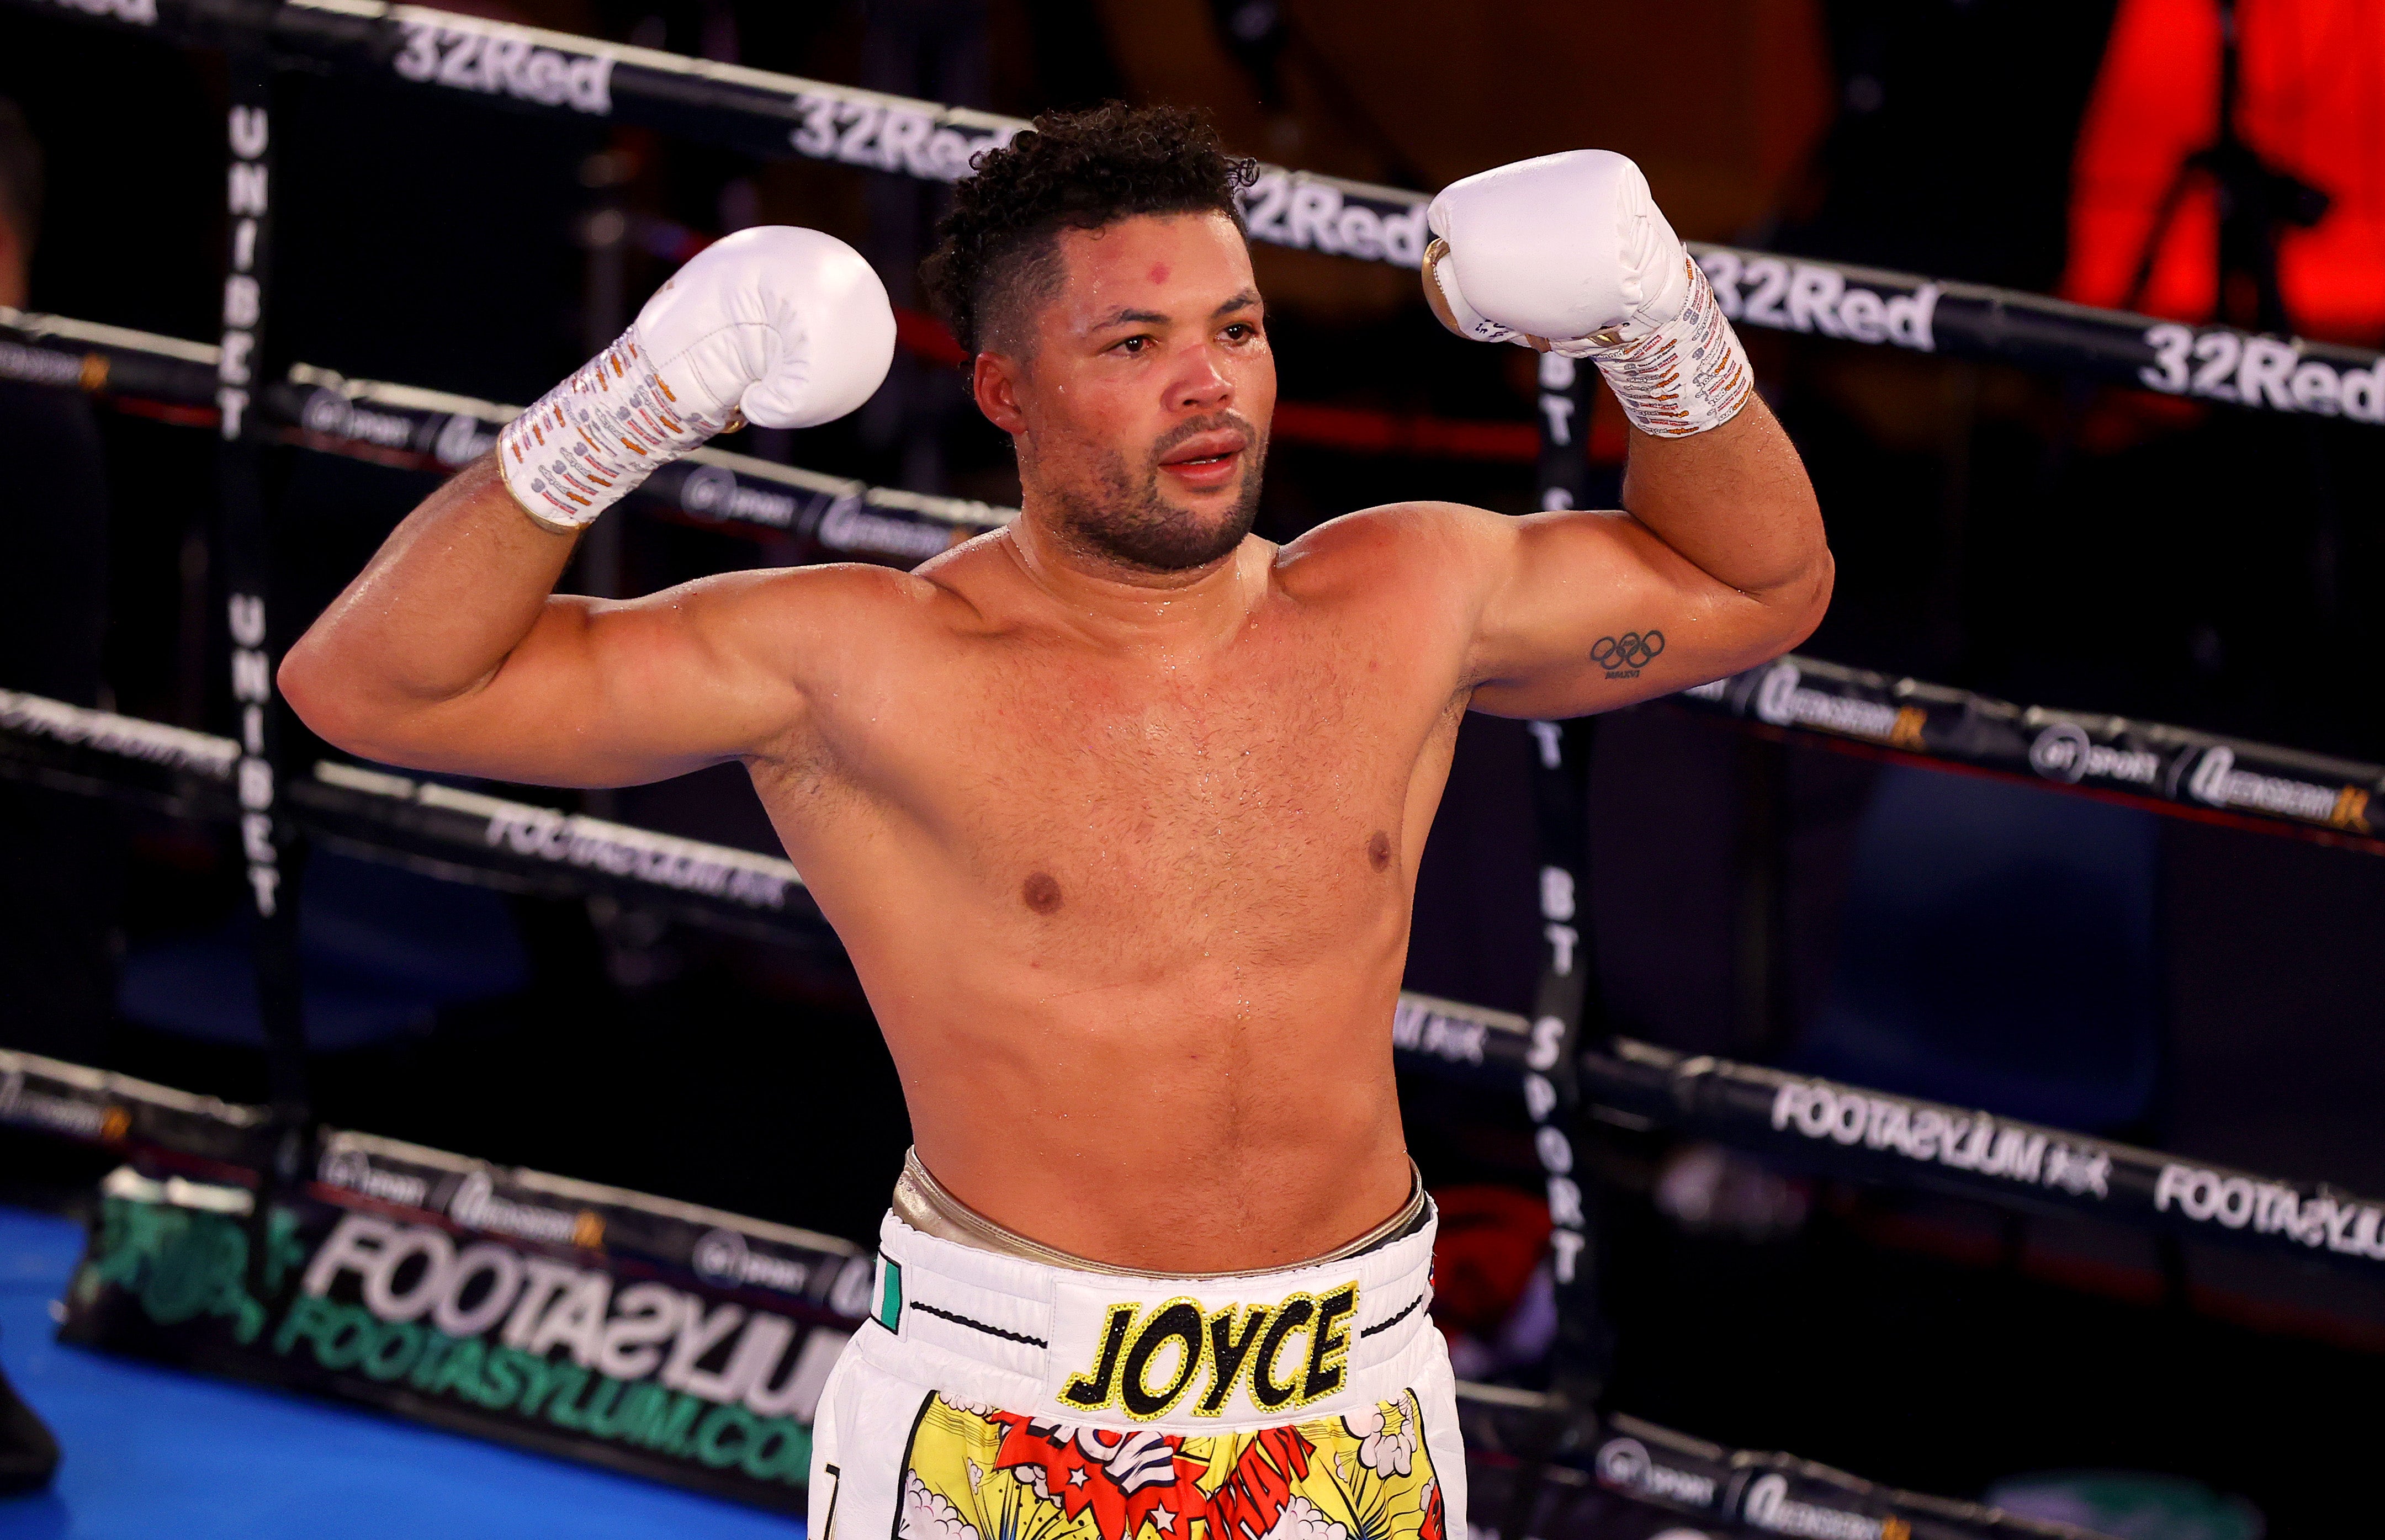 Joe Joyce pulled off a stunning victory over British rival Daniel Dubois in November